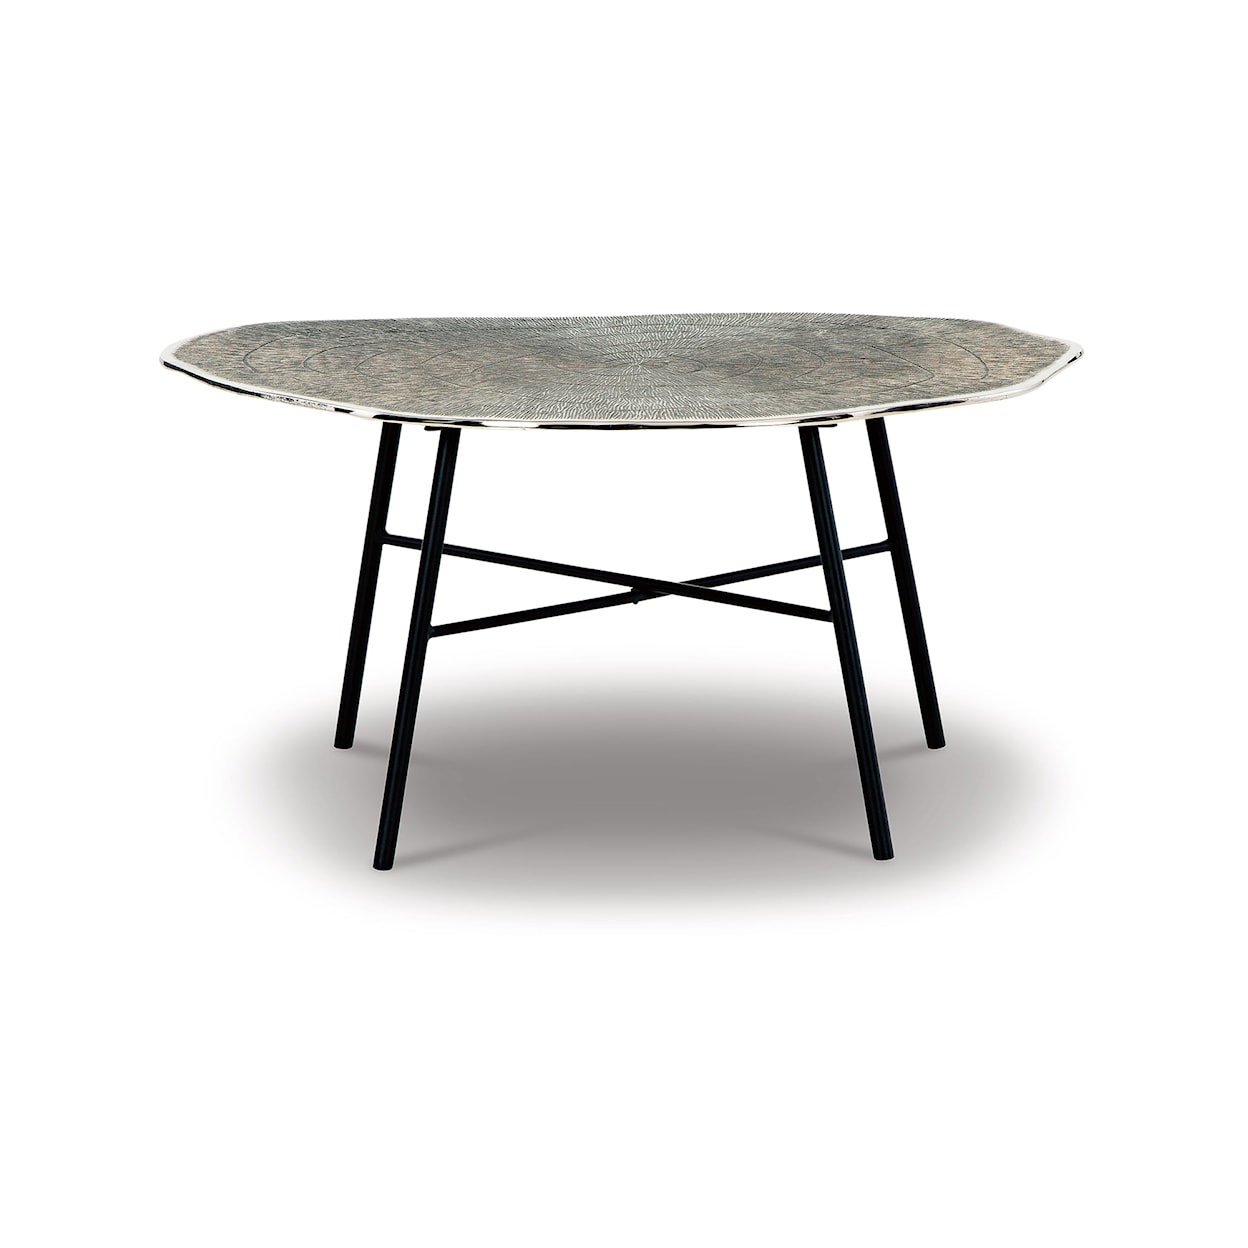 Ashley Furniture Signature Design Laverford Oval Cocktail Table